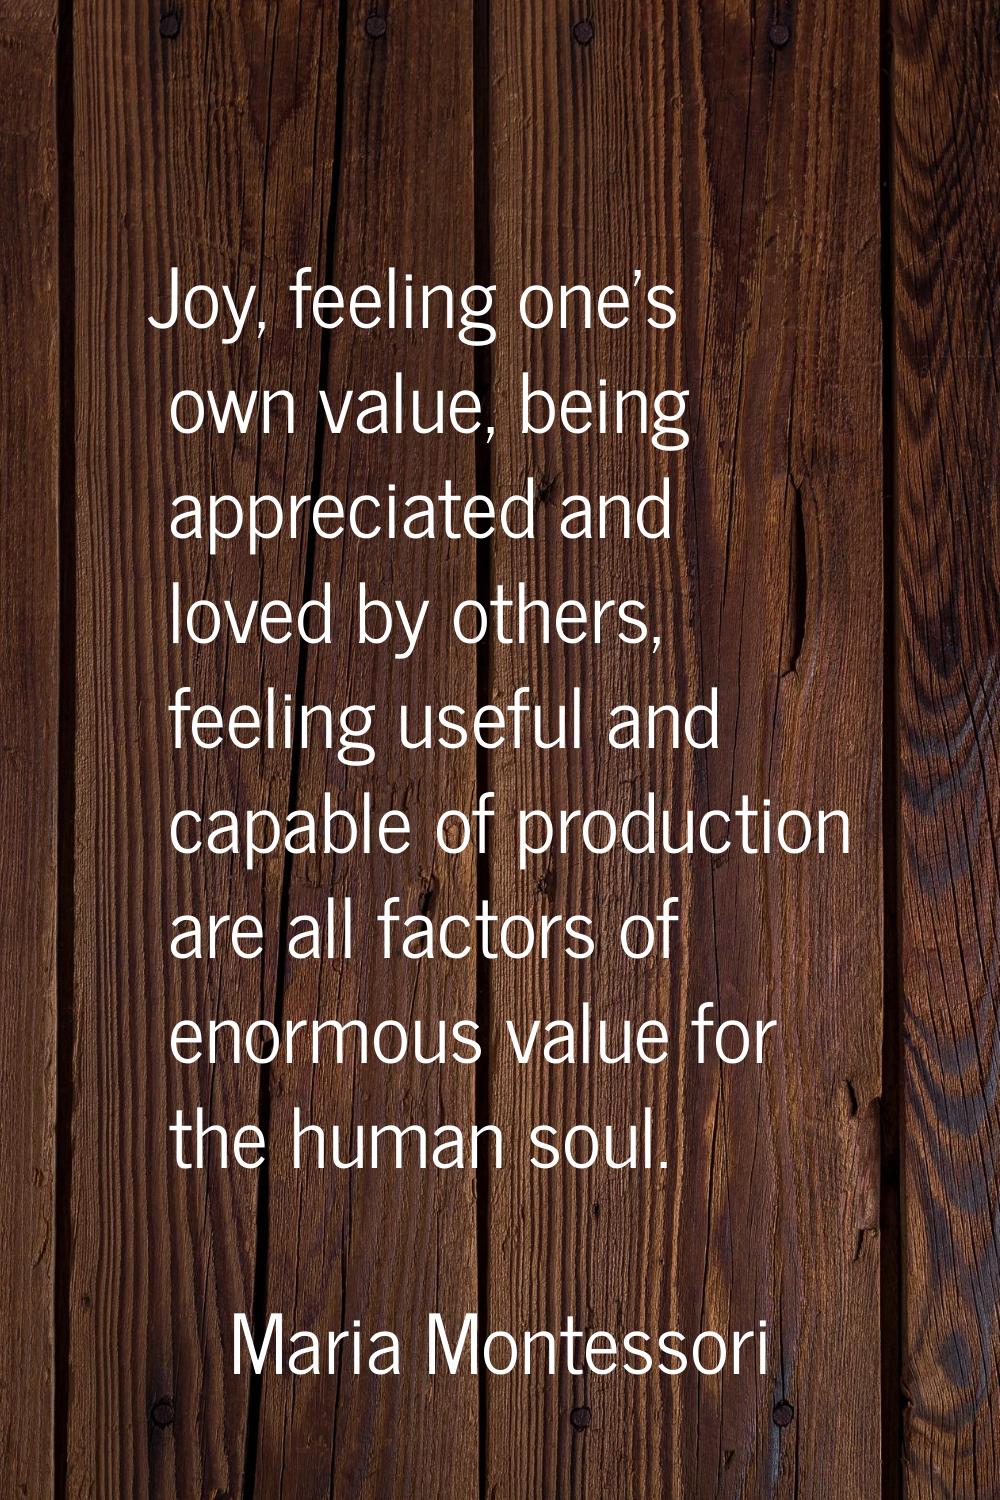 Joy, feeling one's own value, being appreciated and loved by others, feeling useful and capable of 